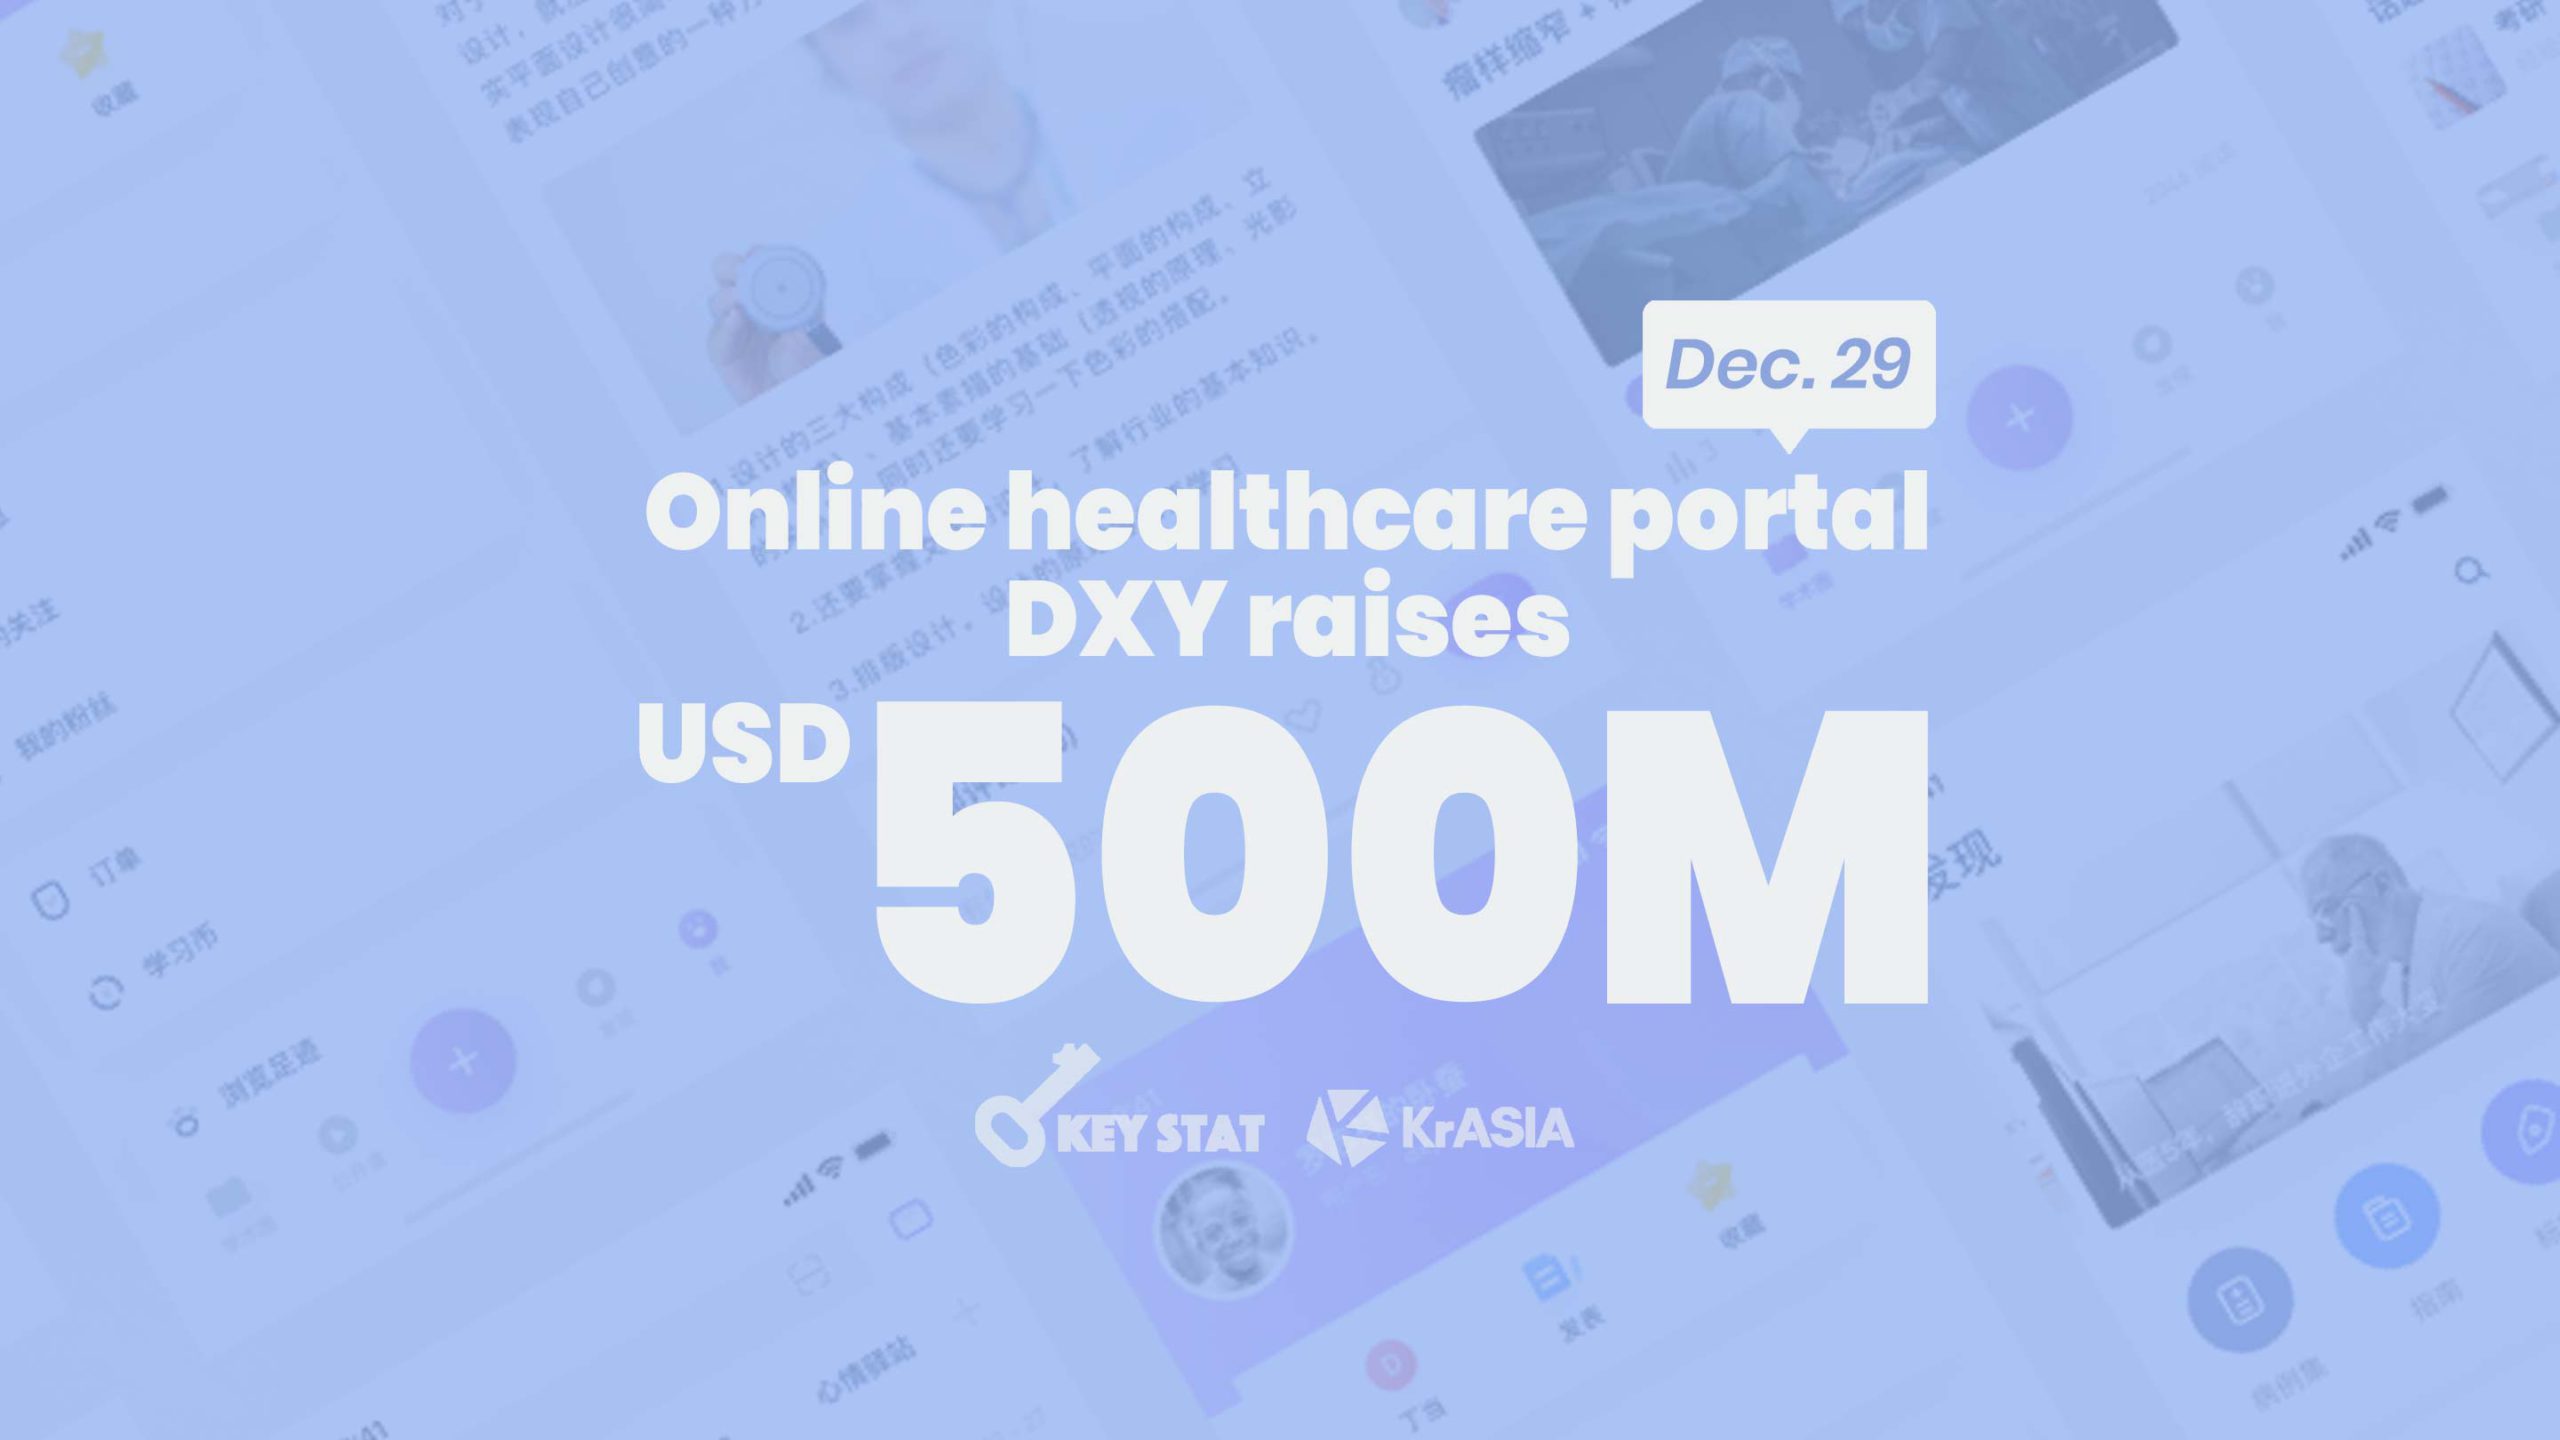 KEY STAT | DXY bags half a billion dollars to shore up forum for medical community